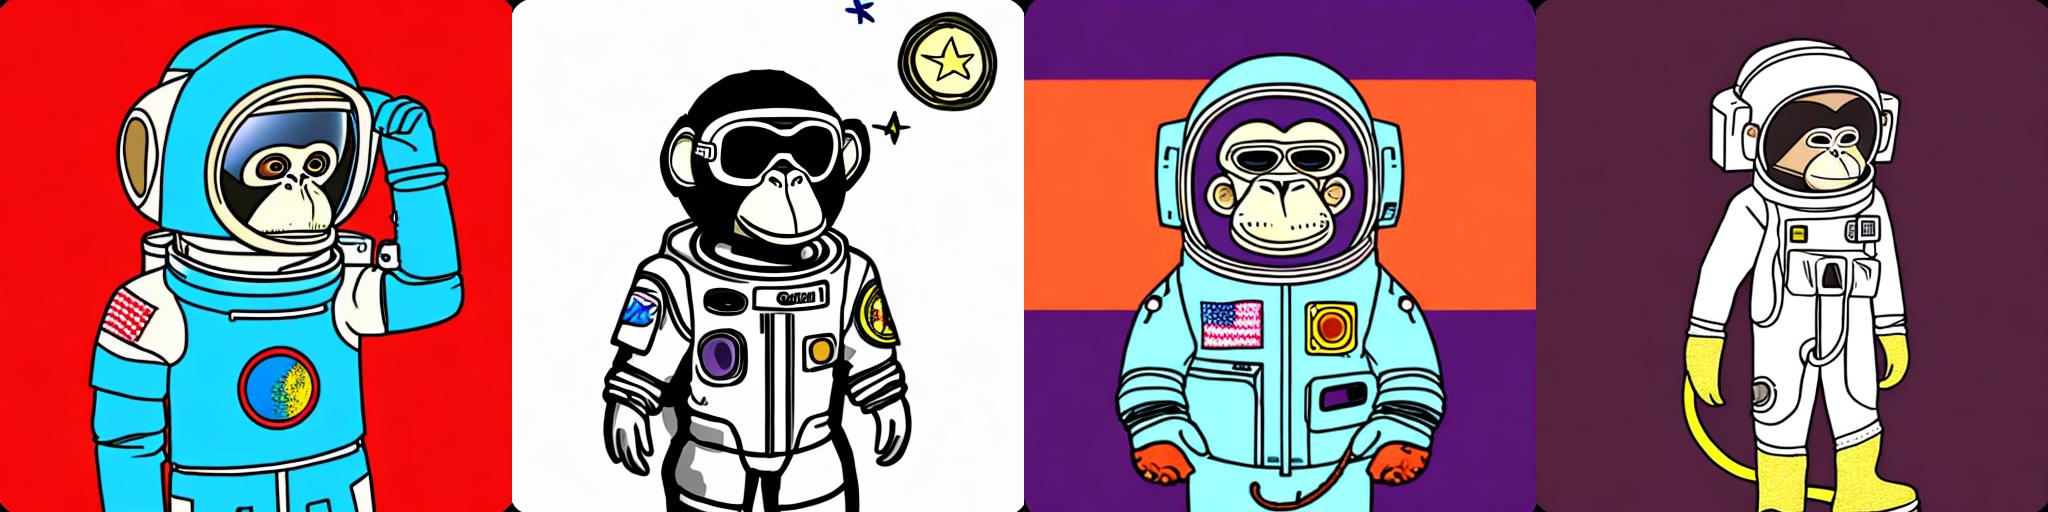 a drawing of drawbayc monkey dressed as an astronaut